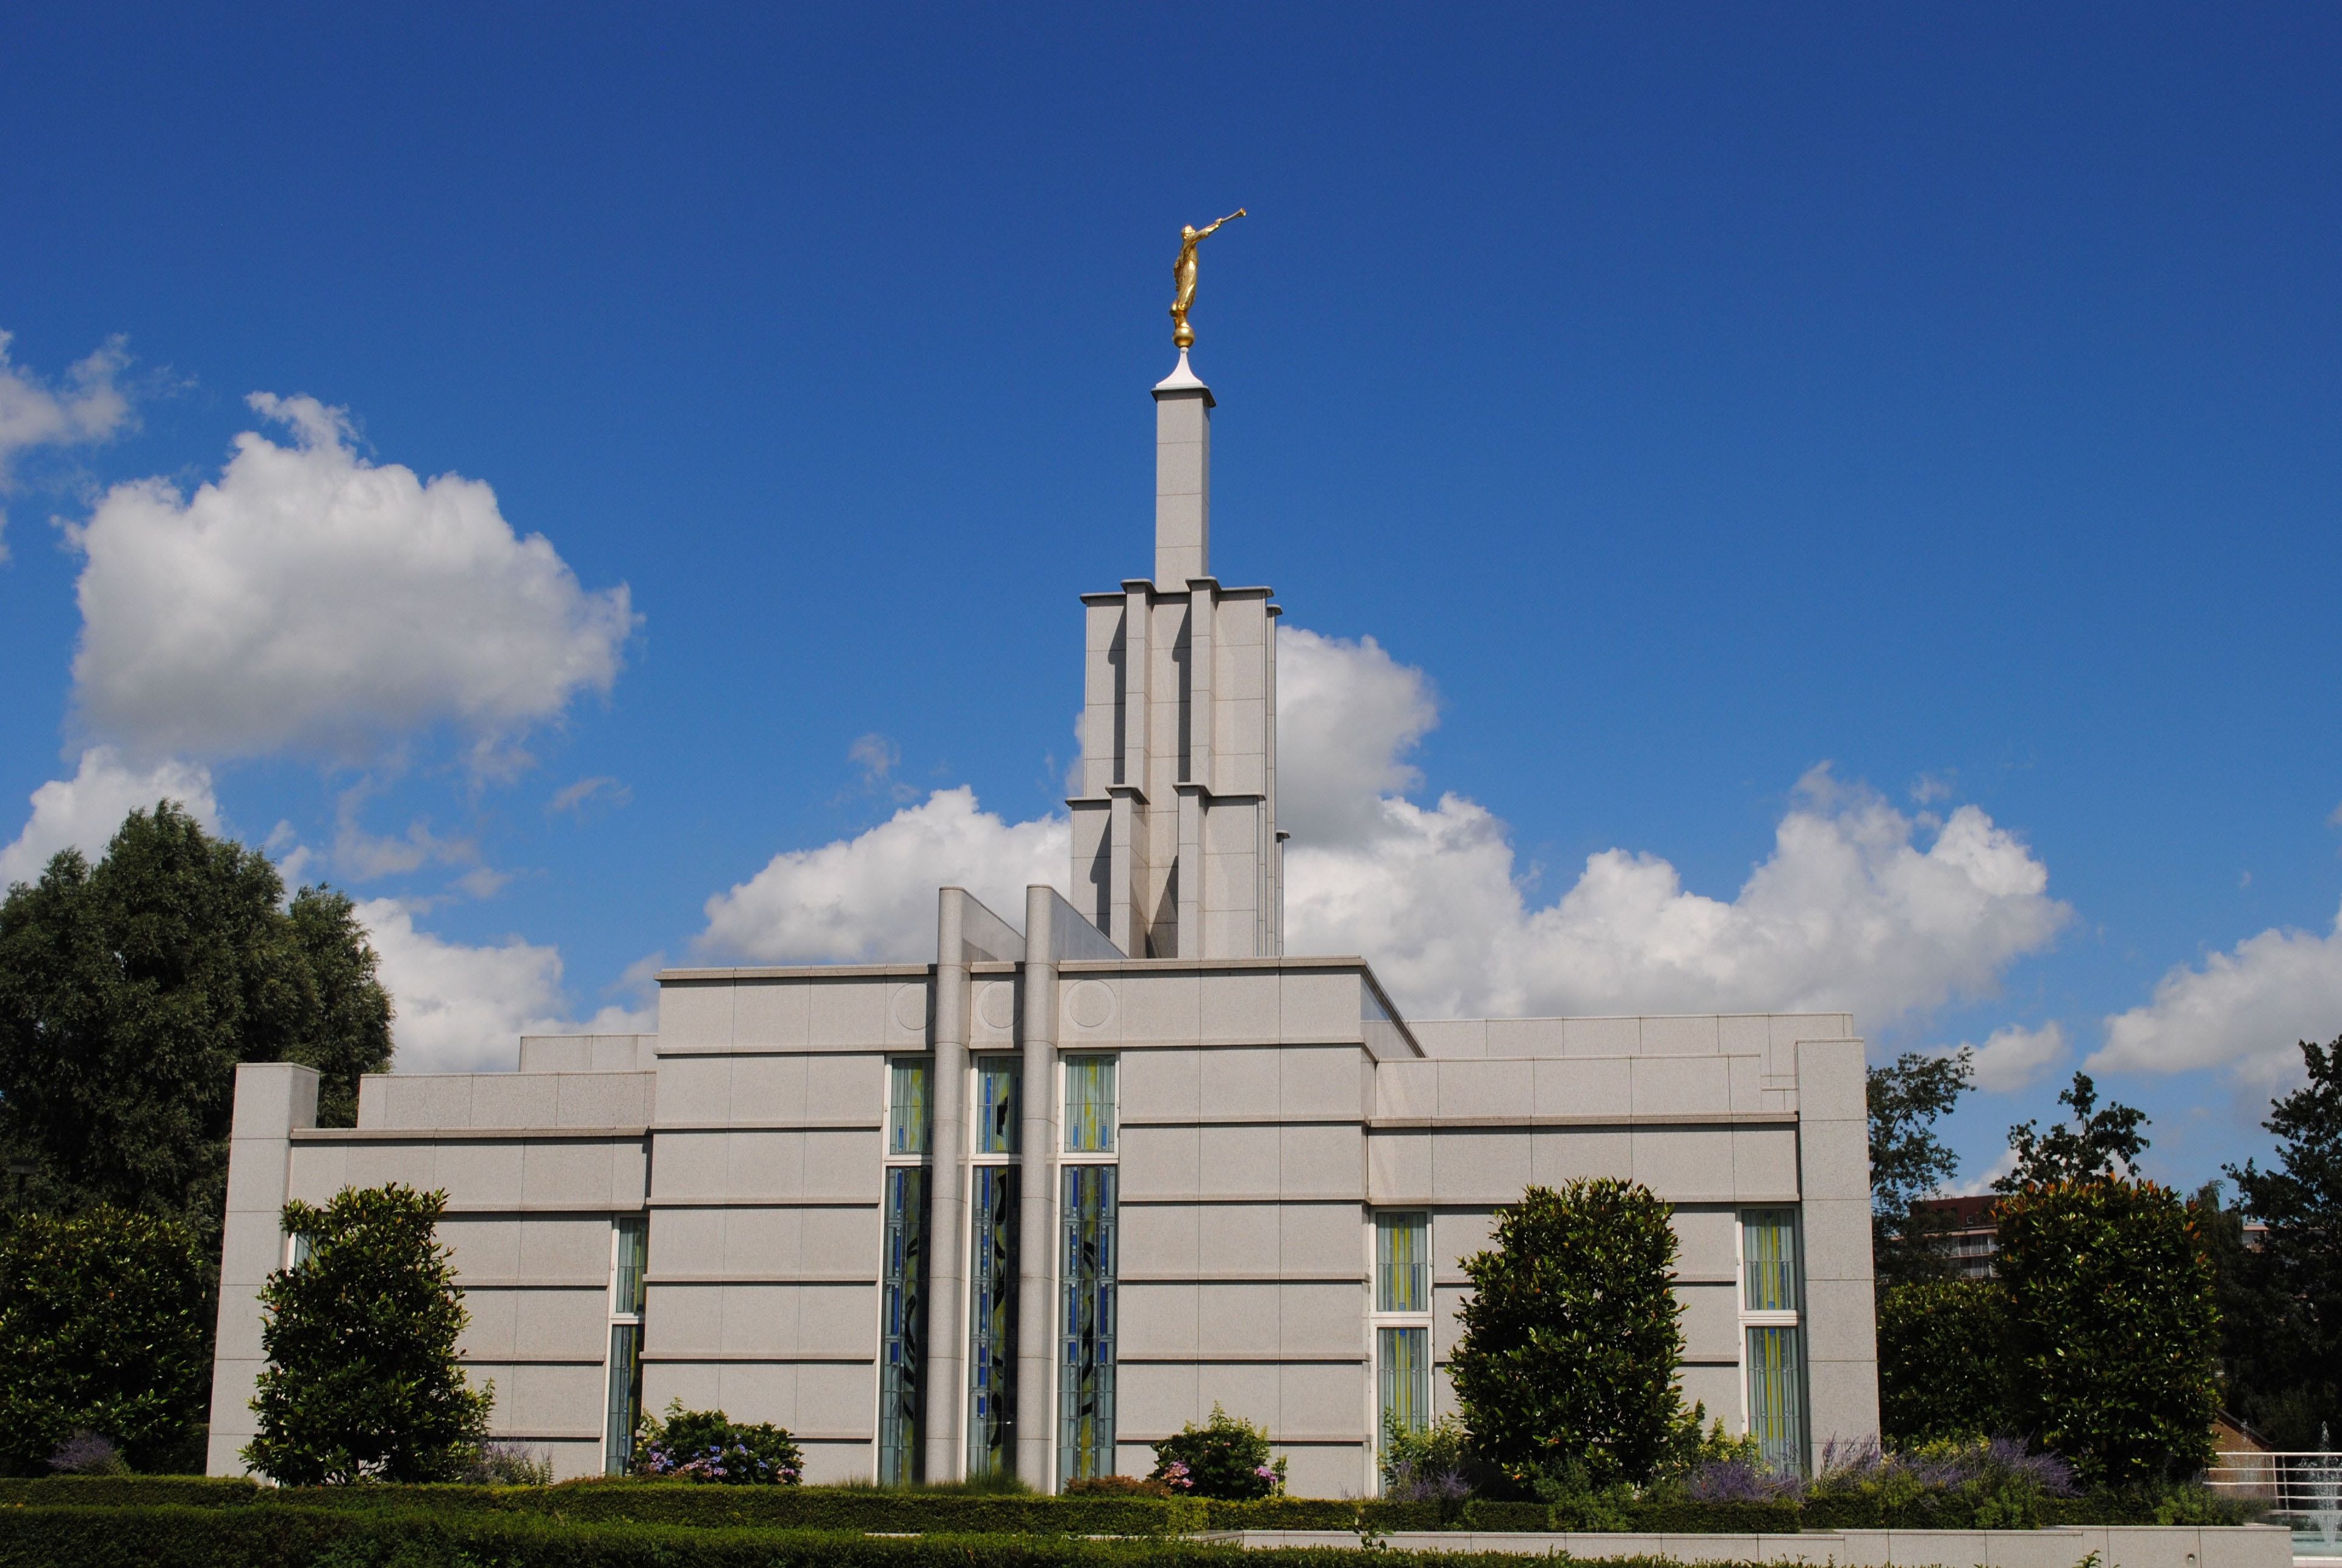 The Hague Netherlands Temple south side, including scenery.